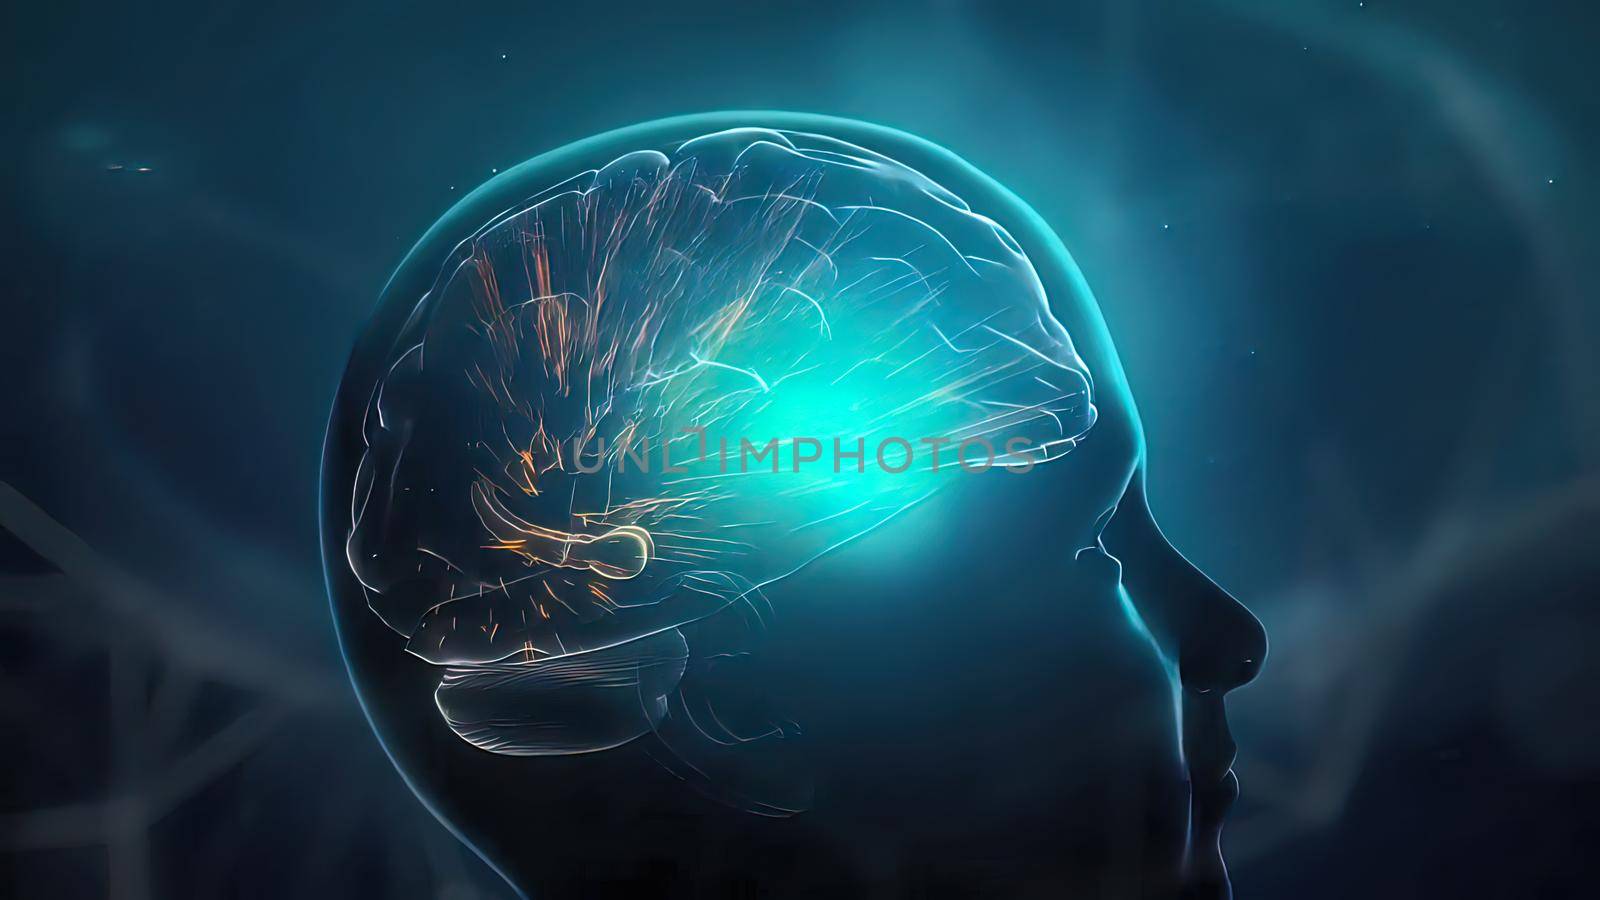 Neurons Transmit Messages In The Brain. Neurons are the cells that pass chemical and electrical signals along the pathways in the brain. 3D illustration